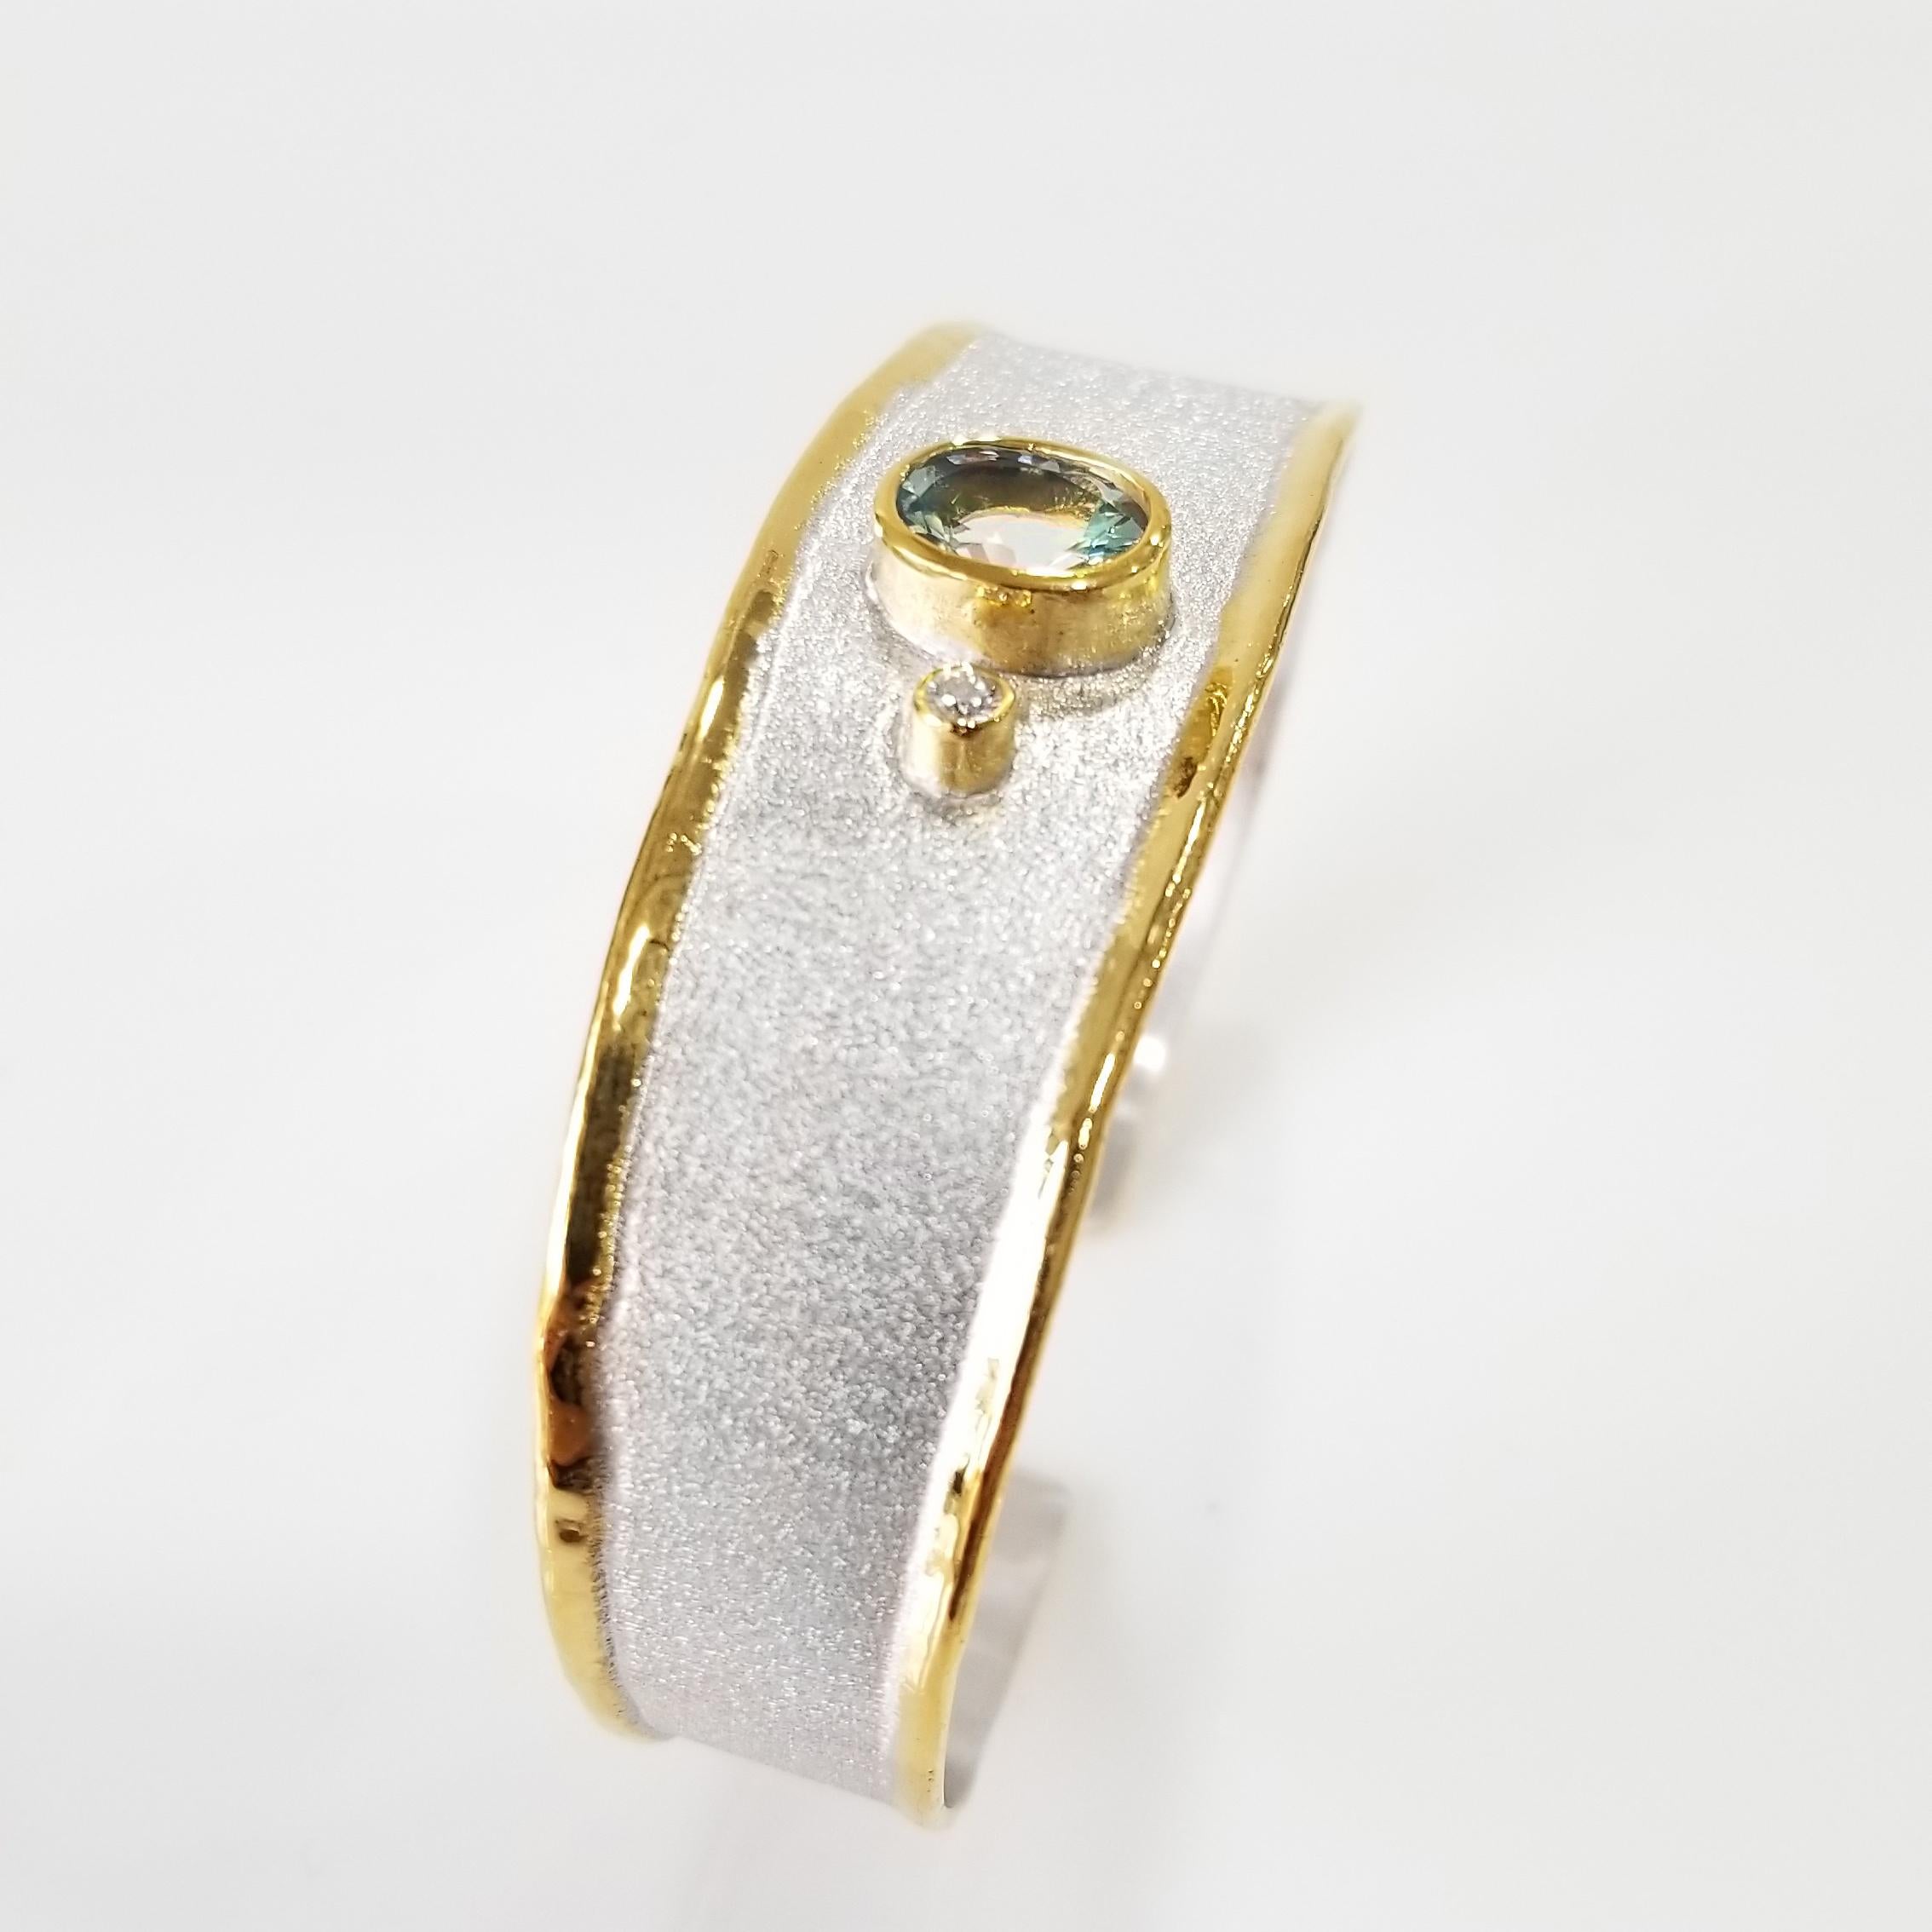 Presenting Yianni Creations bangle bracelet from Midas Collection all handcrafted from fine silver 950 purity and plated with palladium to resist the elements. This artisan bracelet features 1.10 Carat oval shape aquamarine accompanied by 0.03 Carat